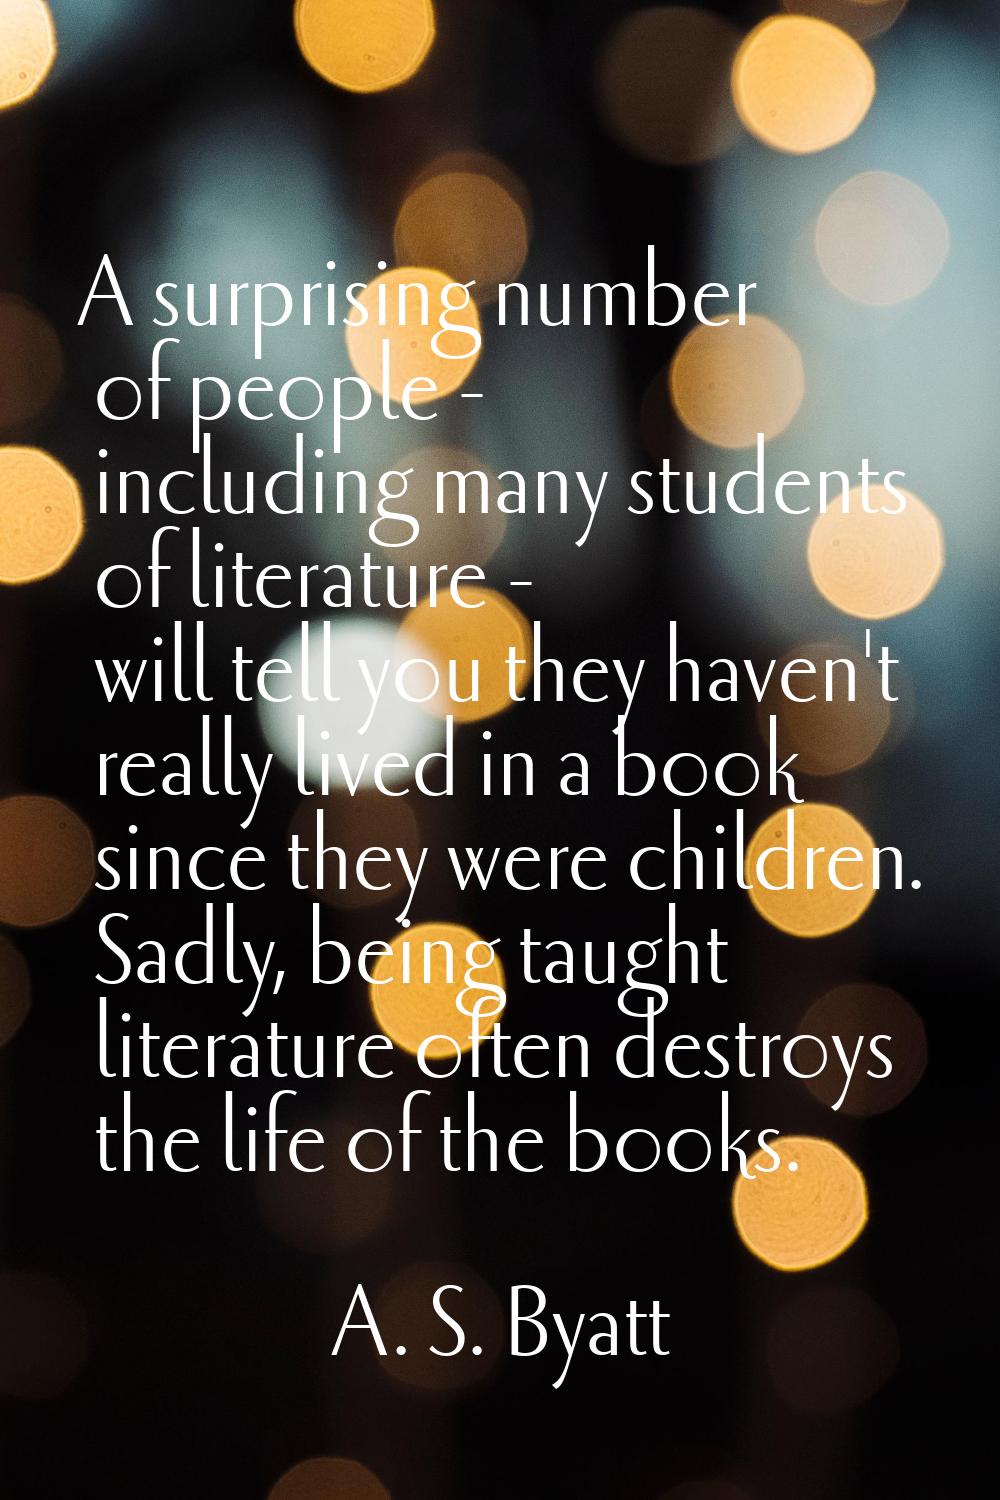 A surprising number of people - including many students of literature - will tell you they haven't 